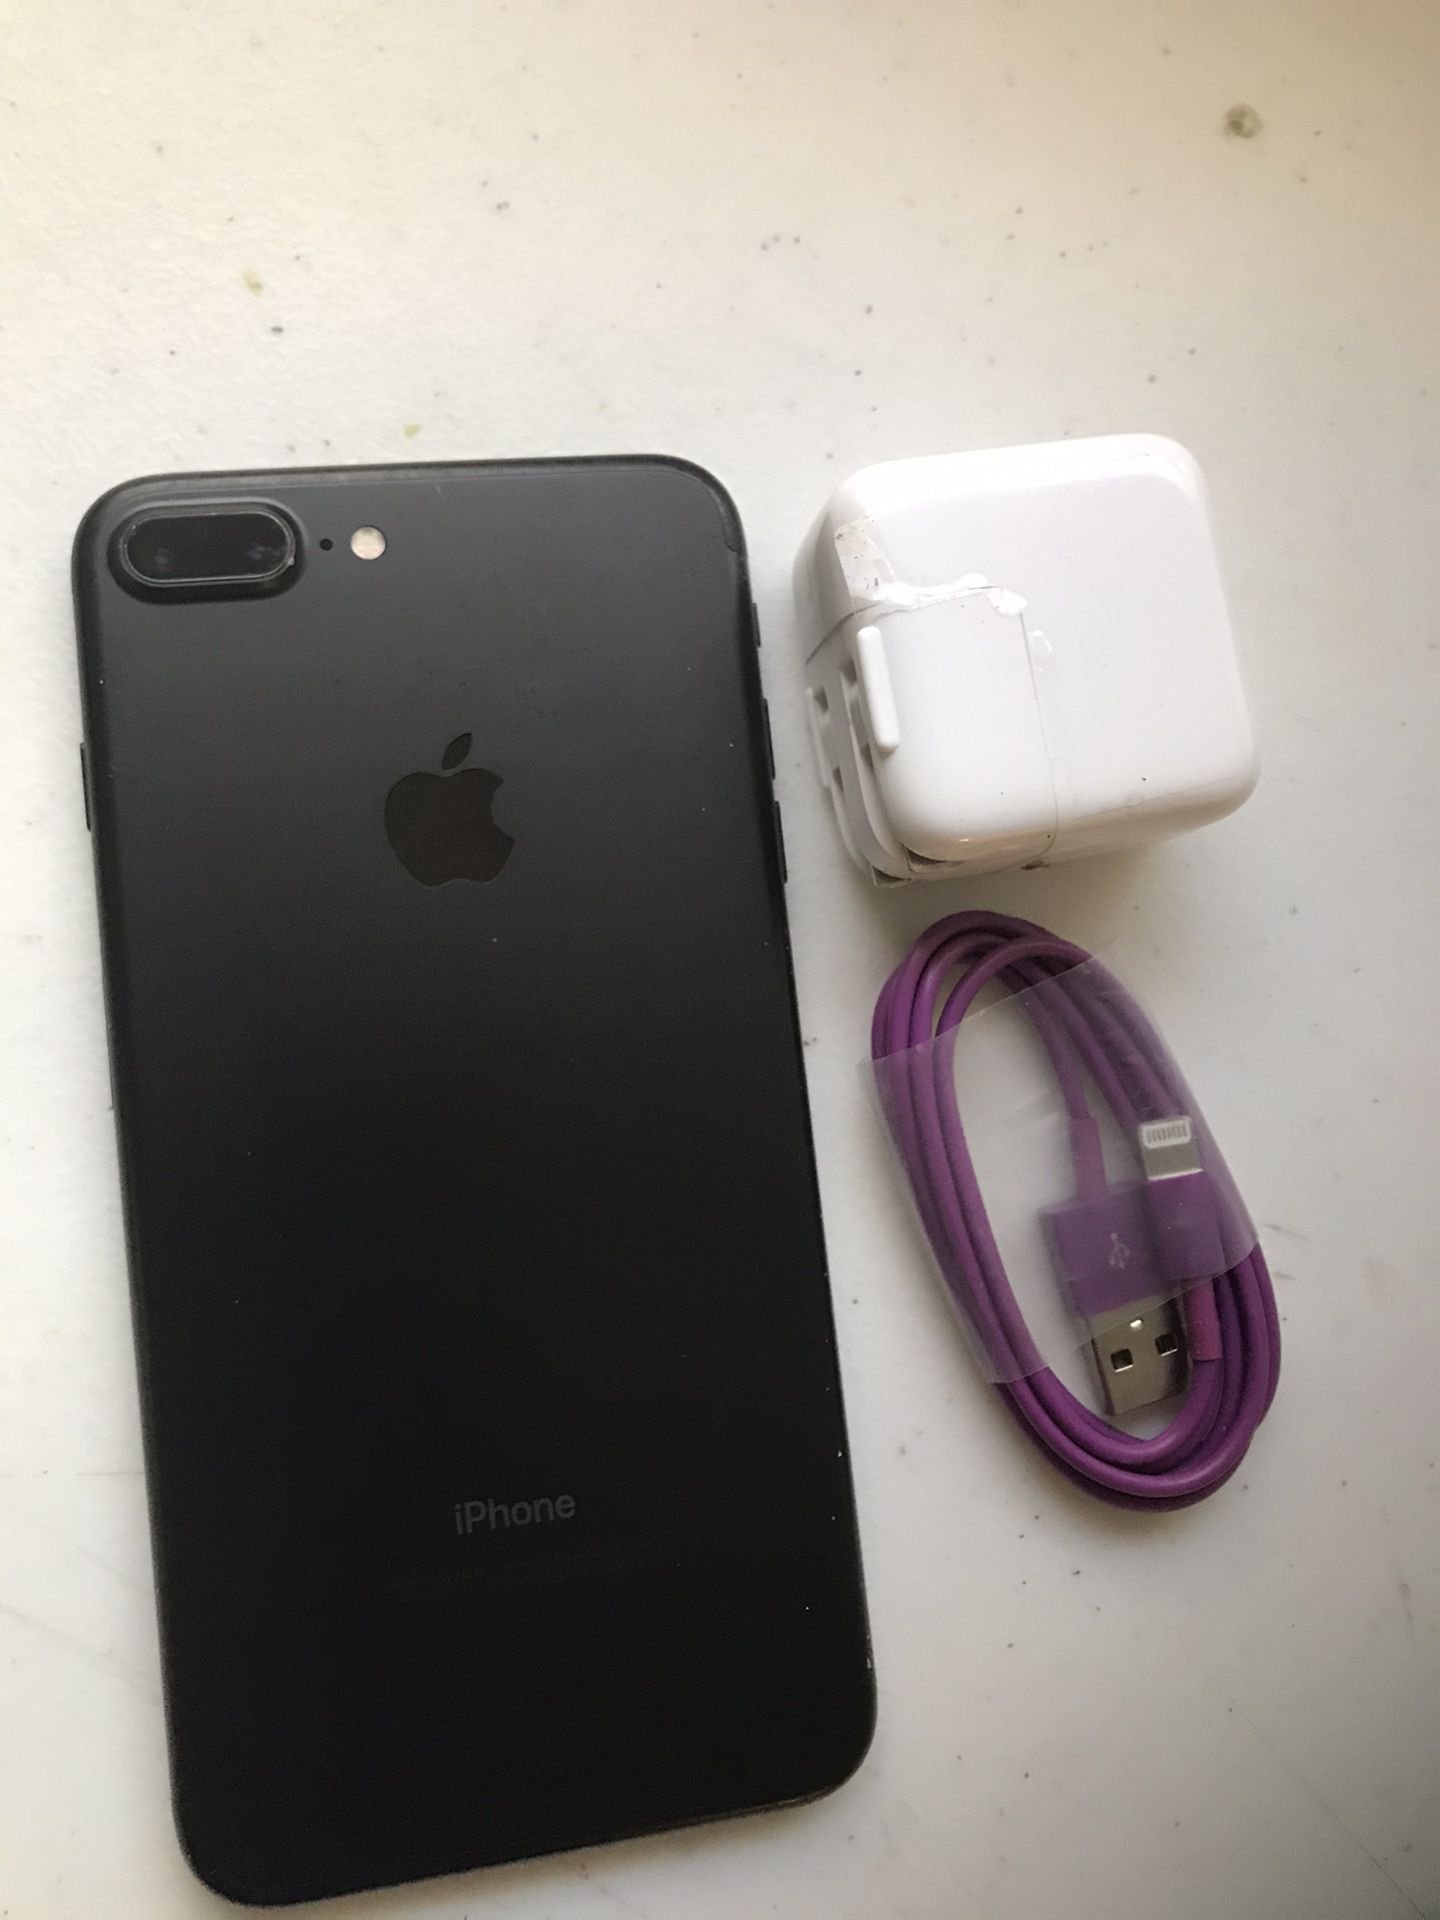 Apple iPhone 7 Plus 32 GB unlocked.color black.work very well.included charger.perfect condition.